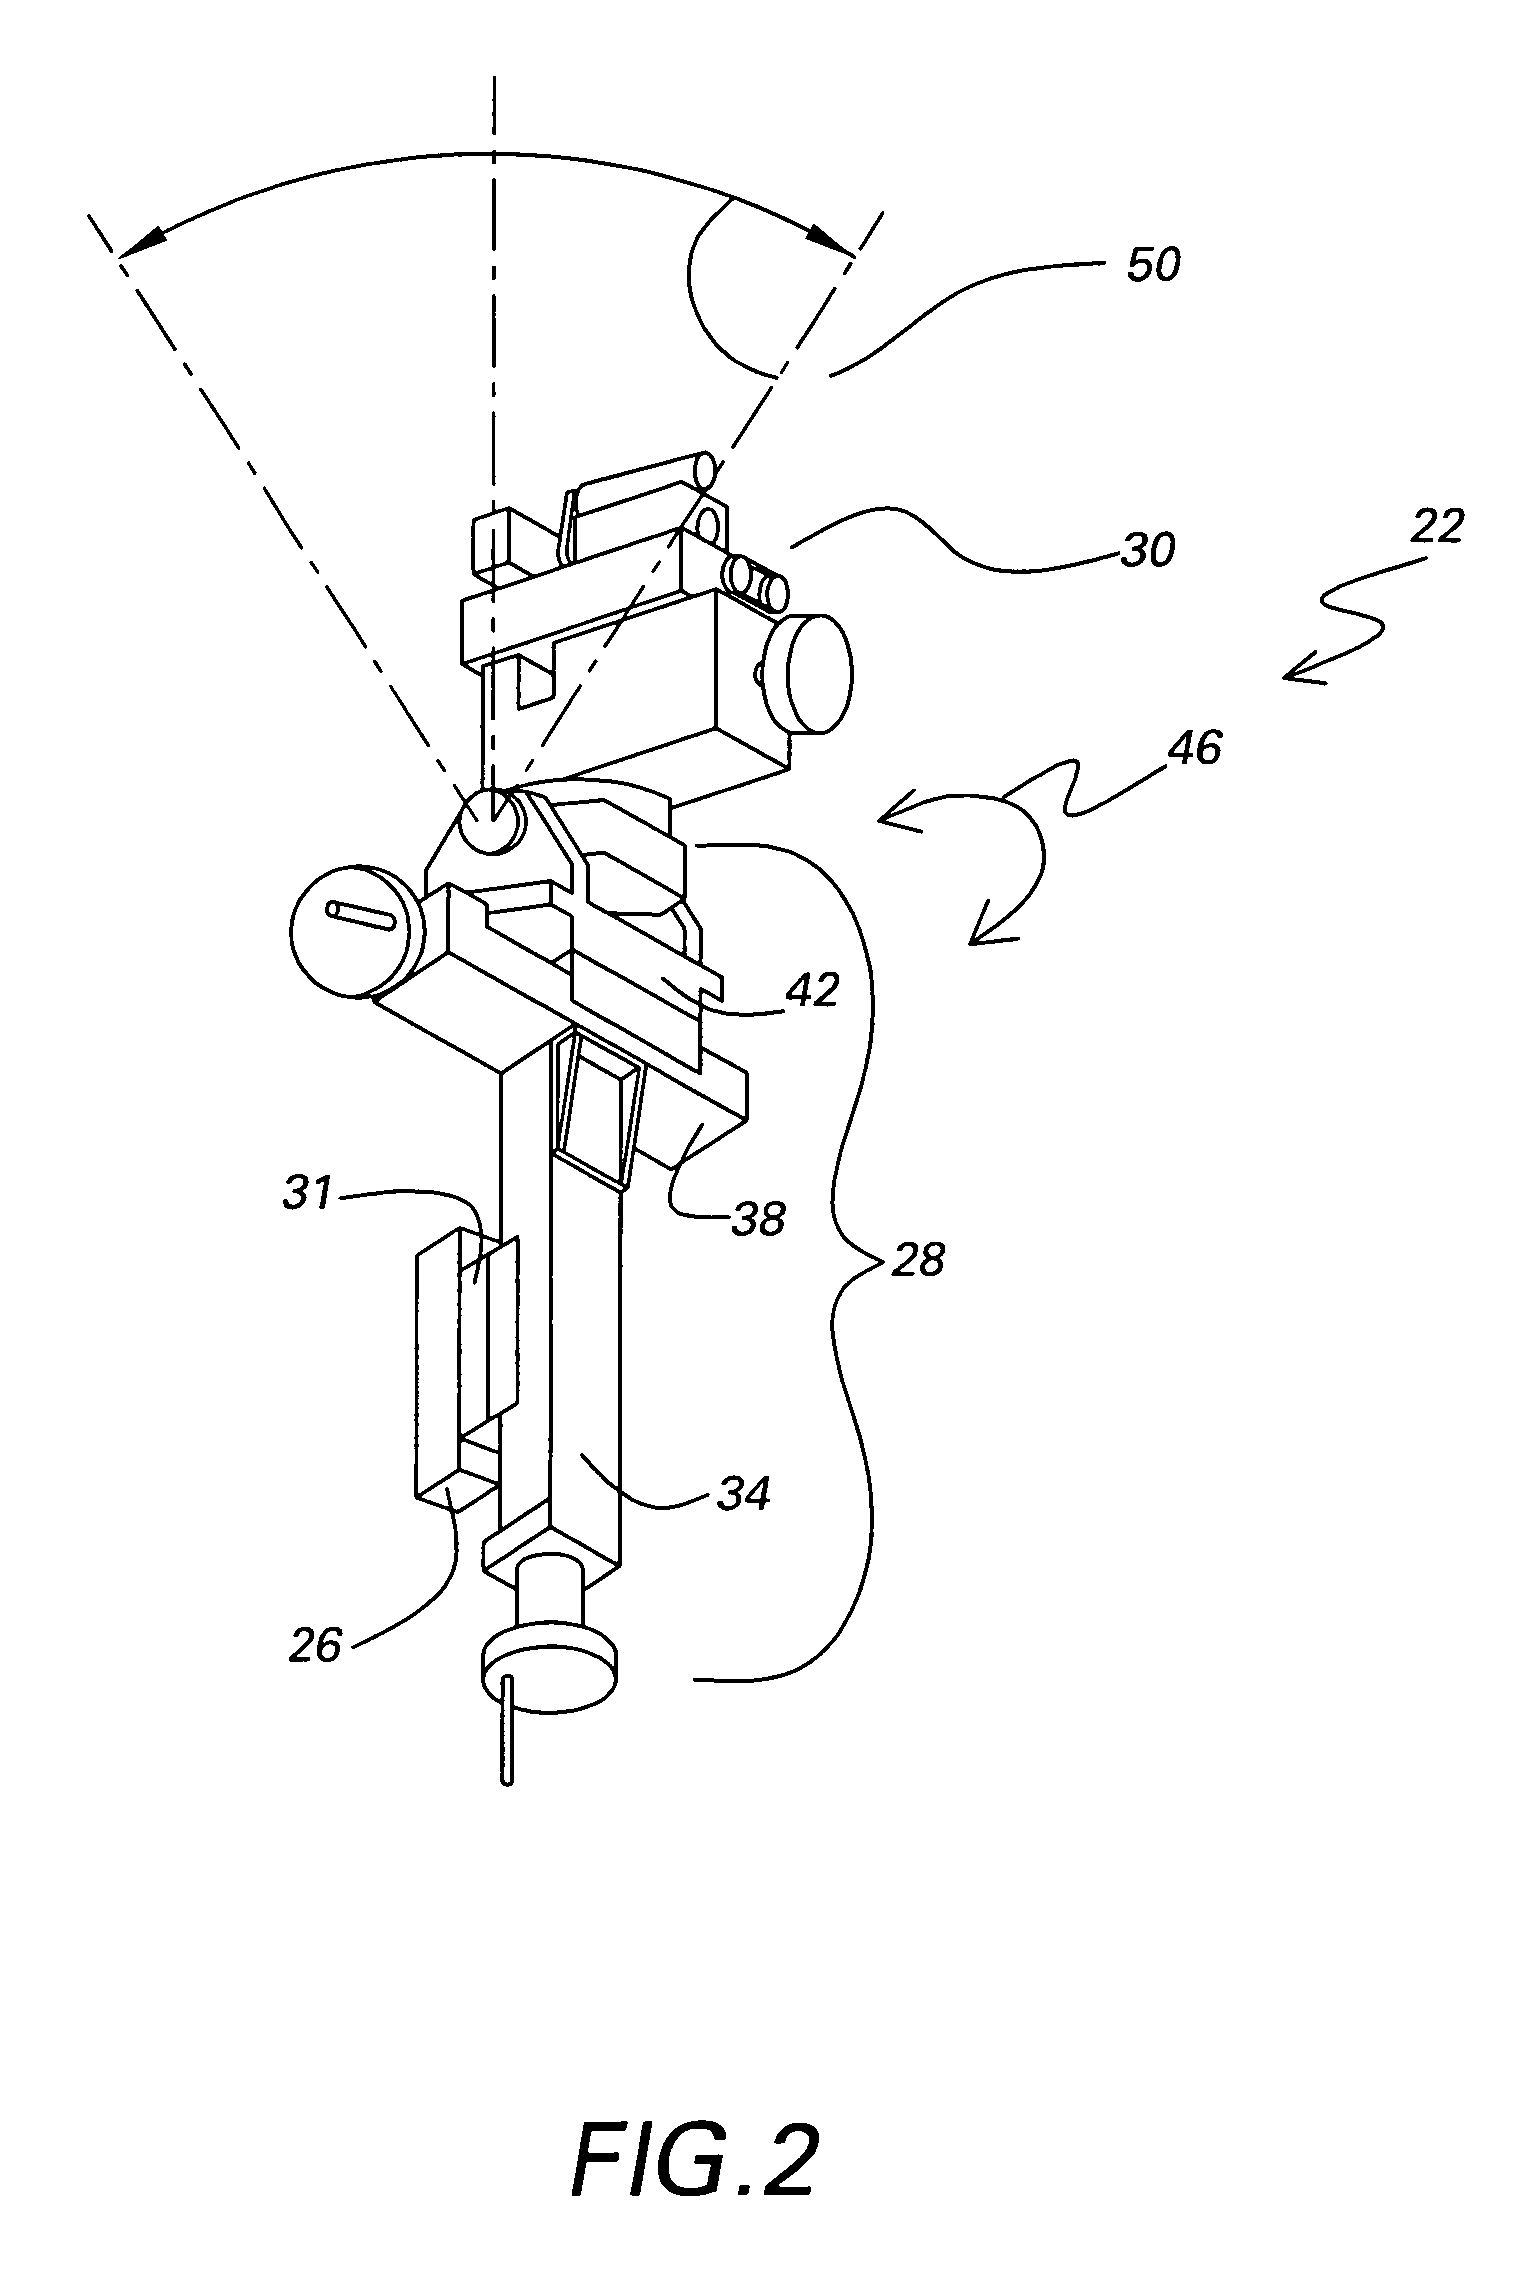 Apparatus and method for machining in confined spaces